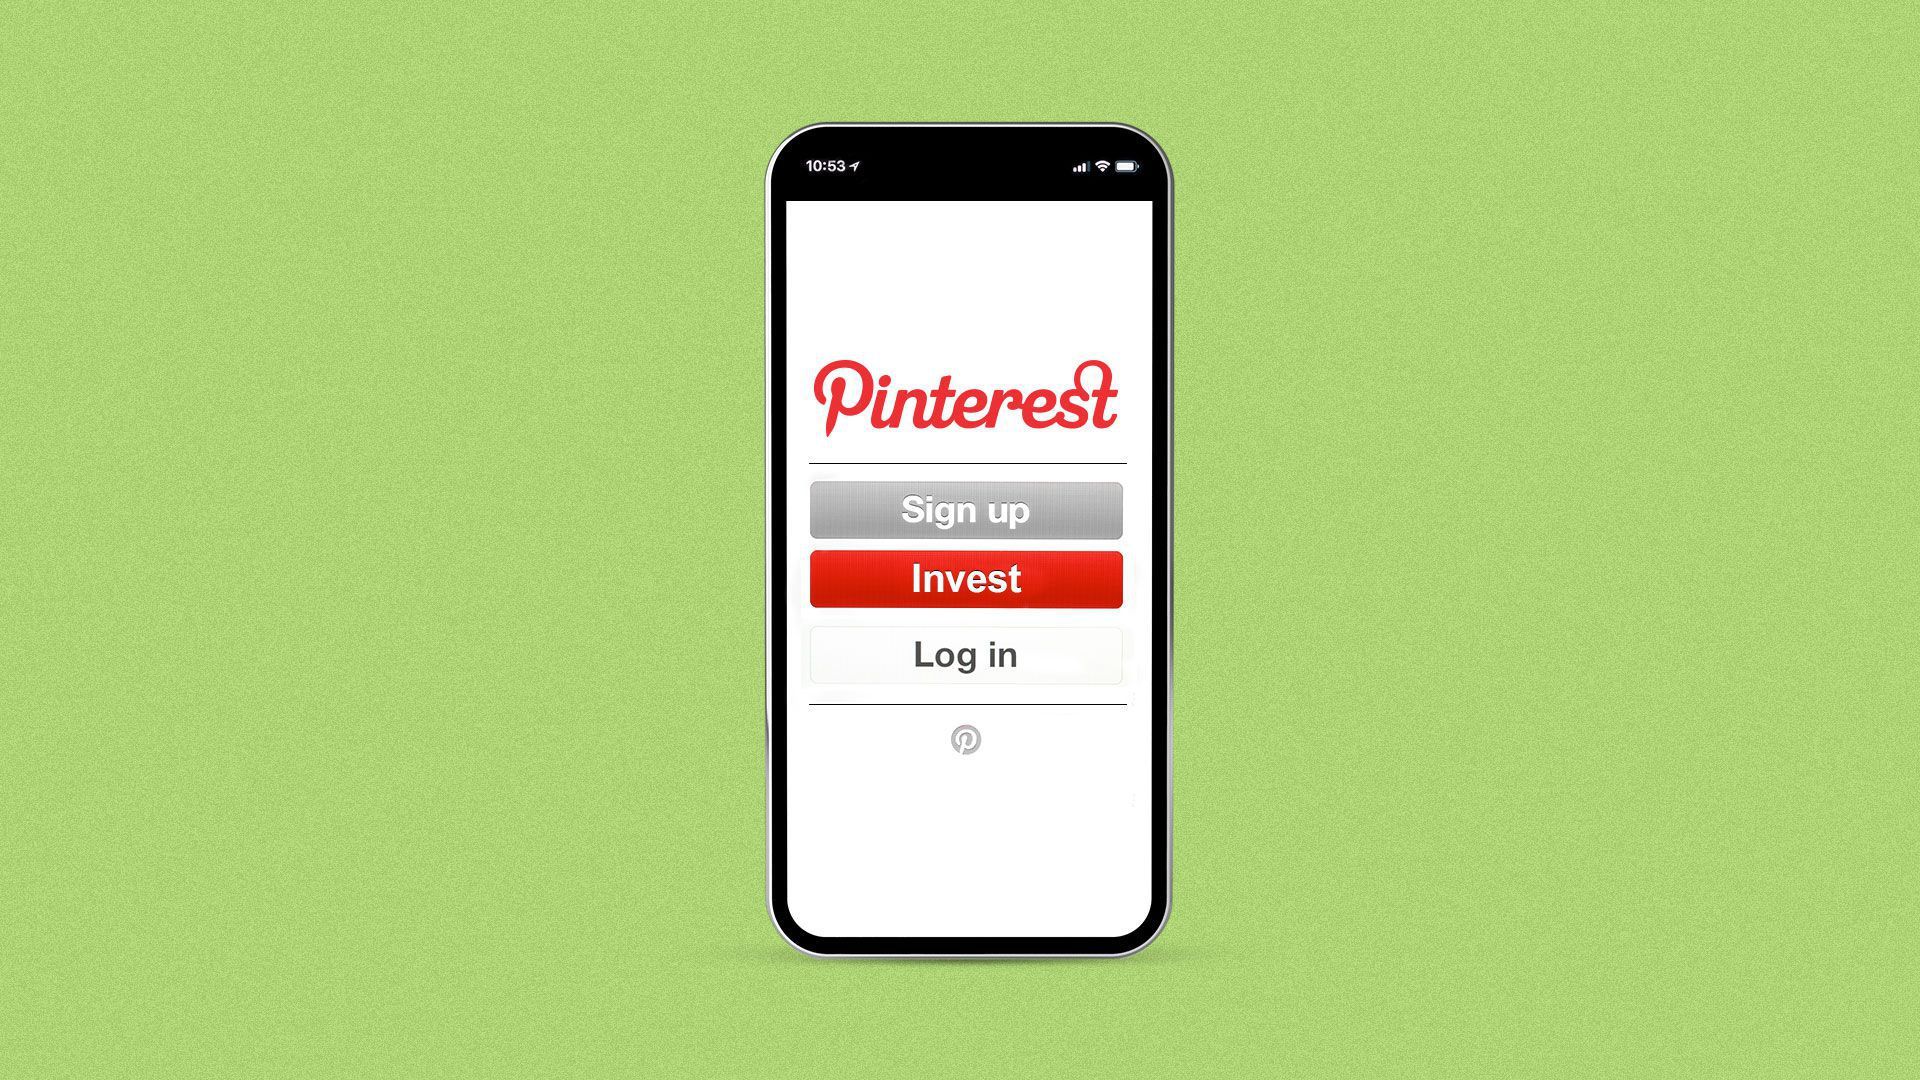 An illustration of a phone with a Pinterest app that includes an invest button